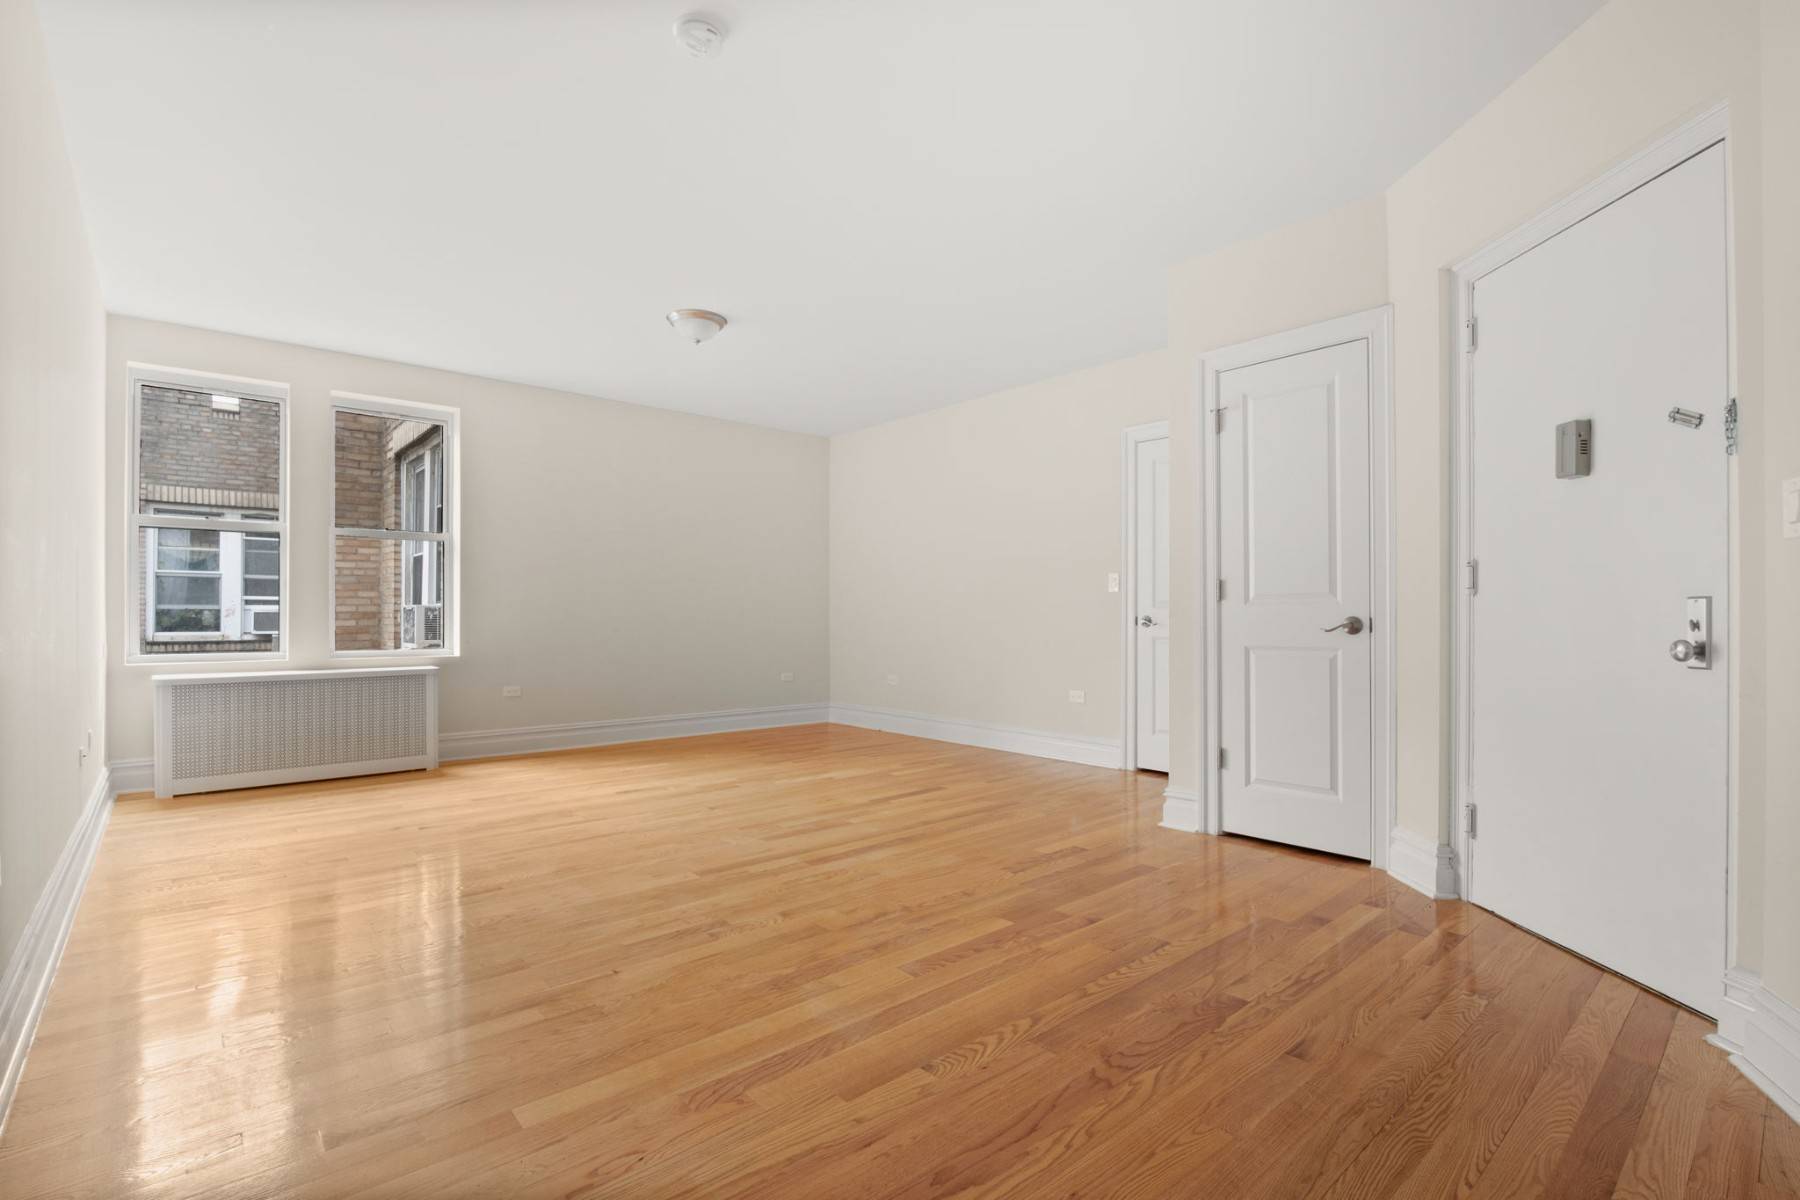 Stunningly bright and spacious, this 2 bed 2 bath unit has views of tree lined streets and a beautiful eat in kitchen !